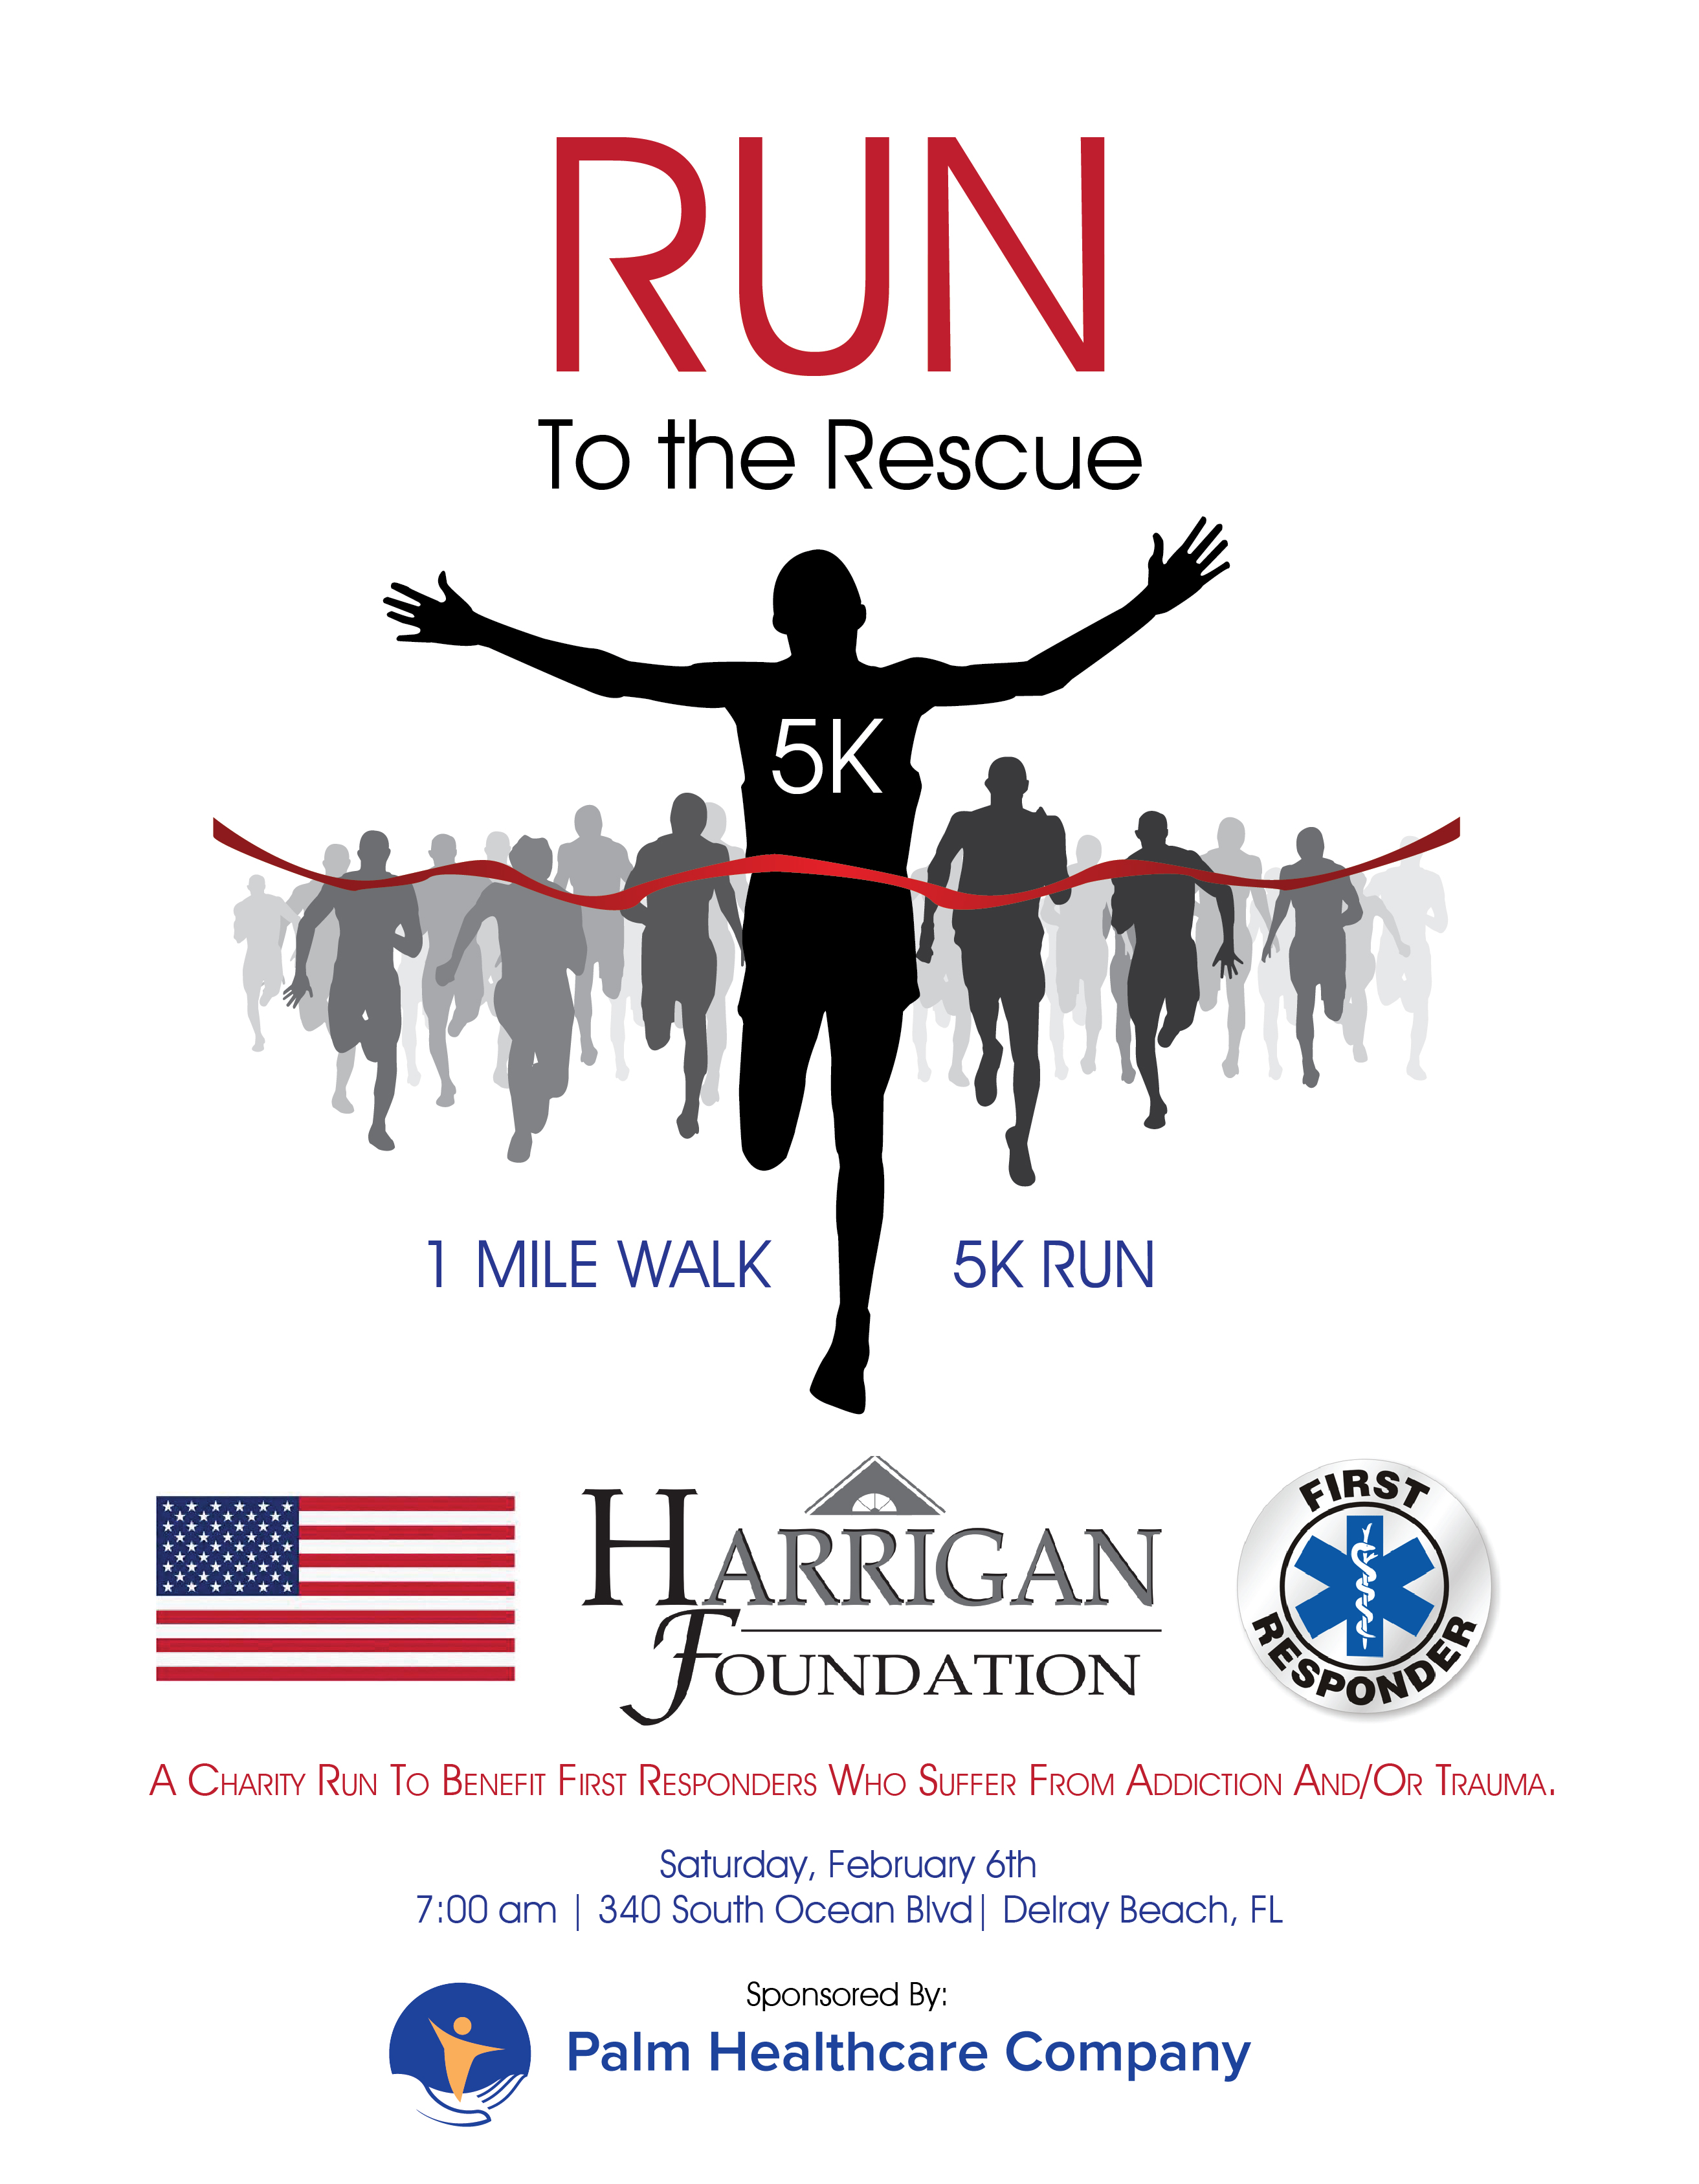 Run to the Rescue 5K/1 Mile Walk for First Responders Fighting Addiction